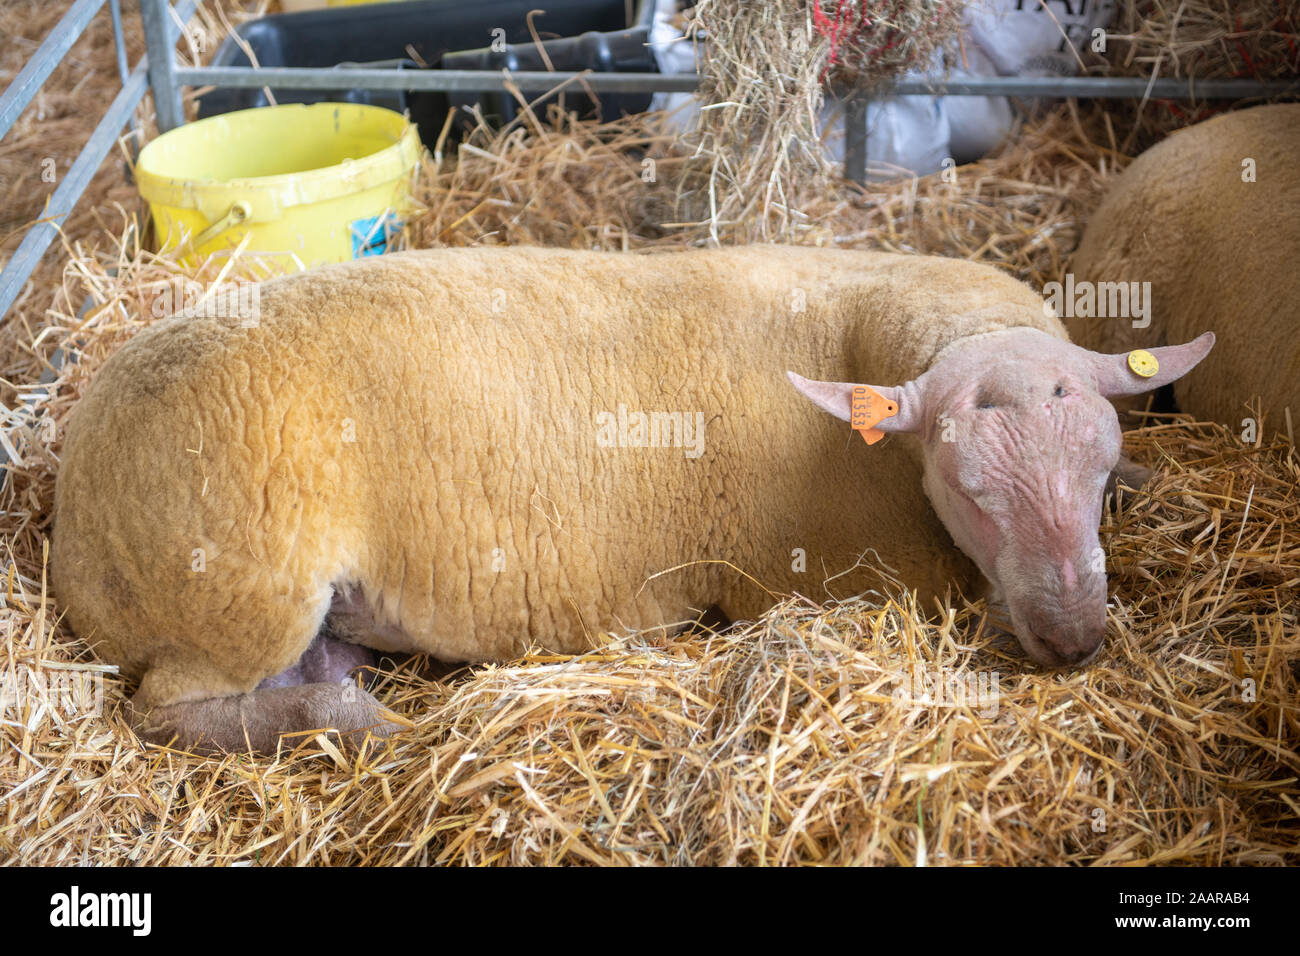 A sheared sheep sleeping at the Great Yorkshire Show, Harrogate, Yorkshire, UK Stock Photo